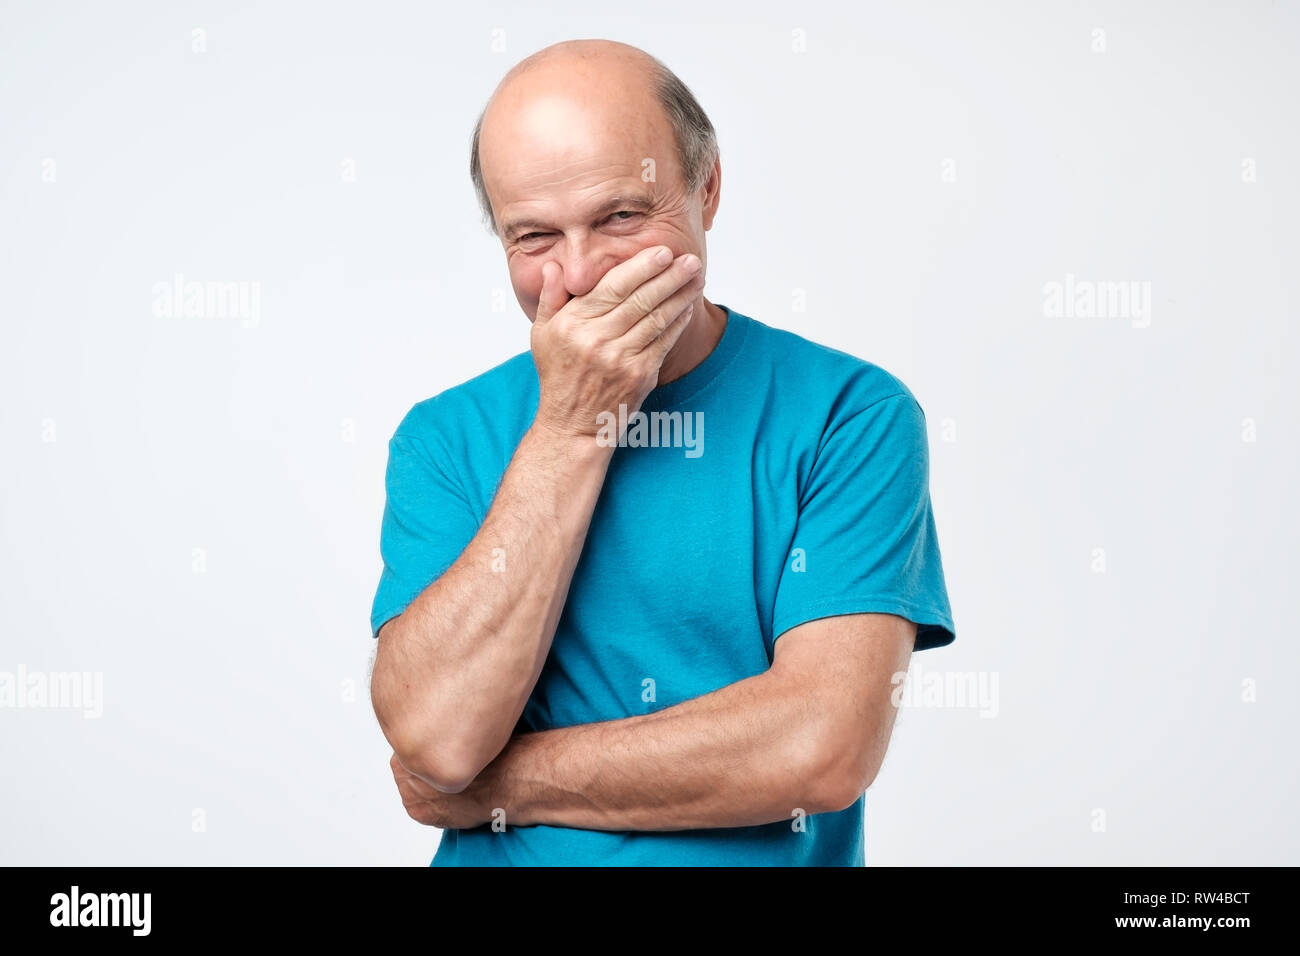 Senior bald hispanic man giggles and covers mouth with his hand Stock Photo